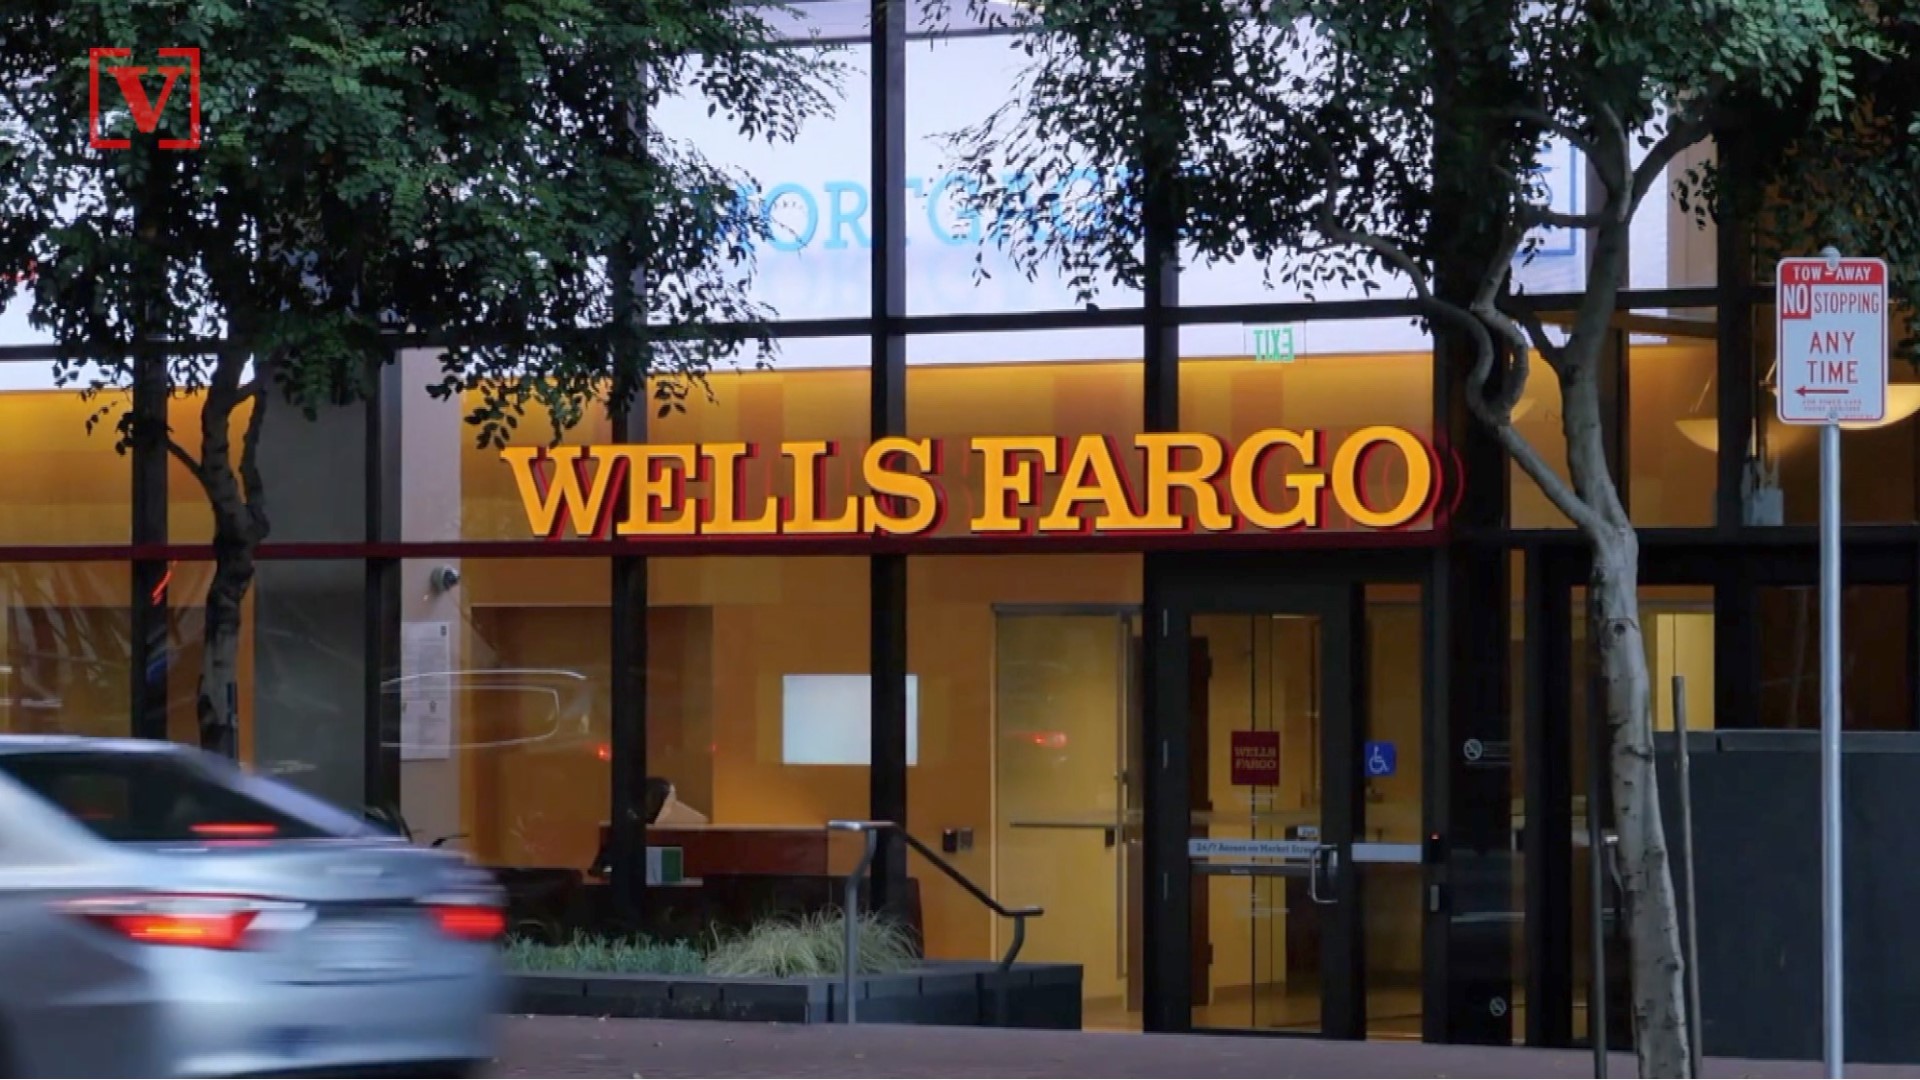 Wells Fargo has agreed to settle claims linked to the creation of millions of fake accounts for profit.